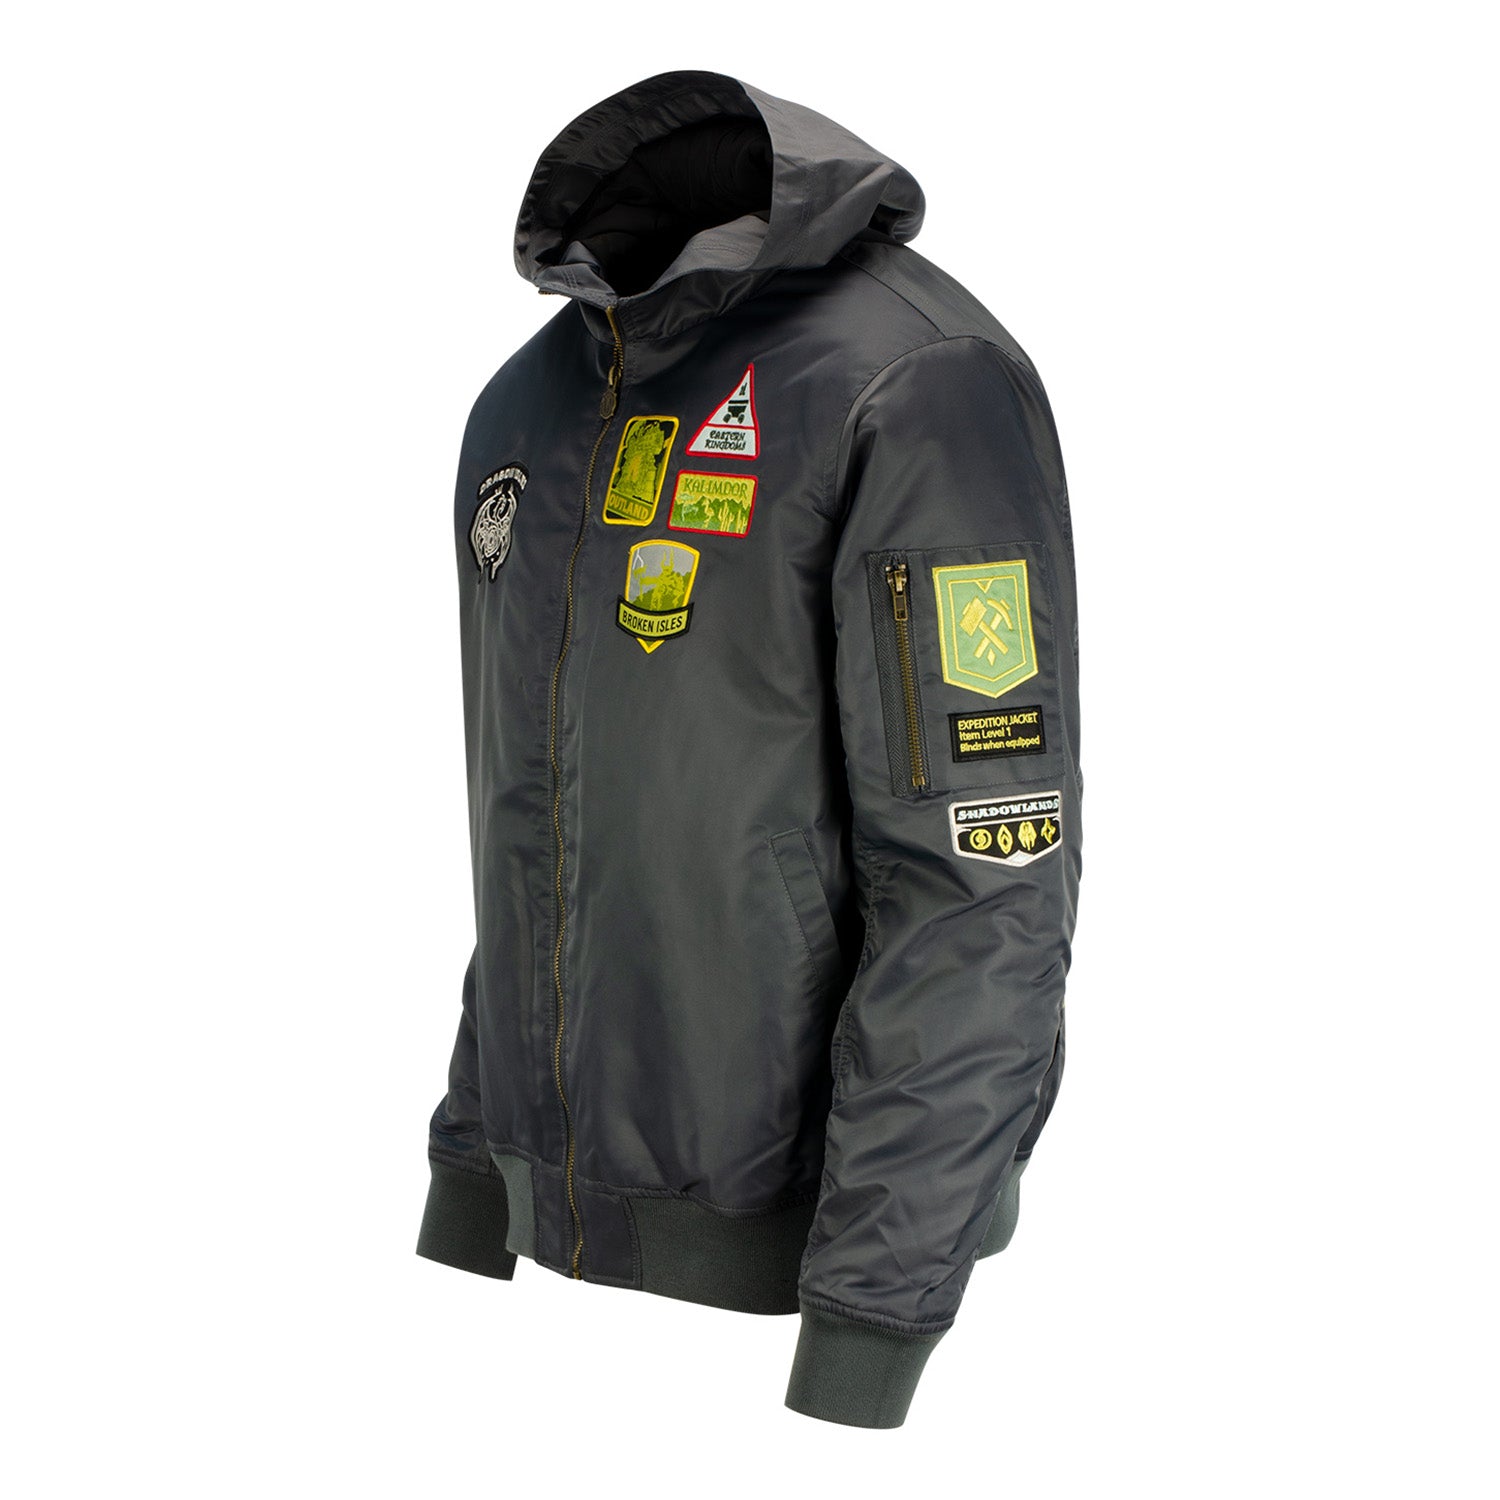 World of Warcraft Expedition Jacket - Left Side View